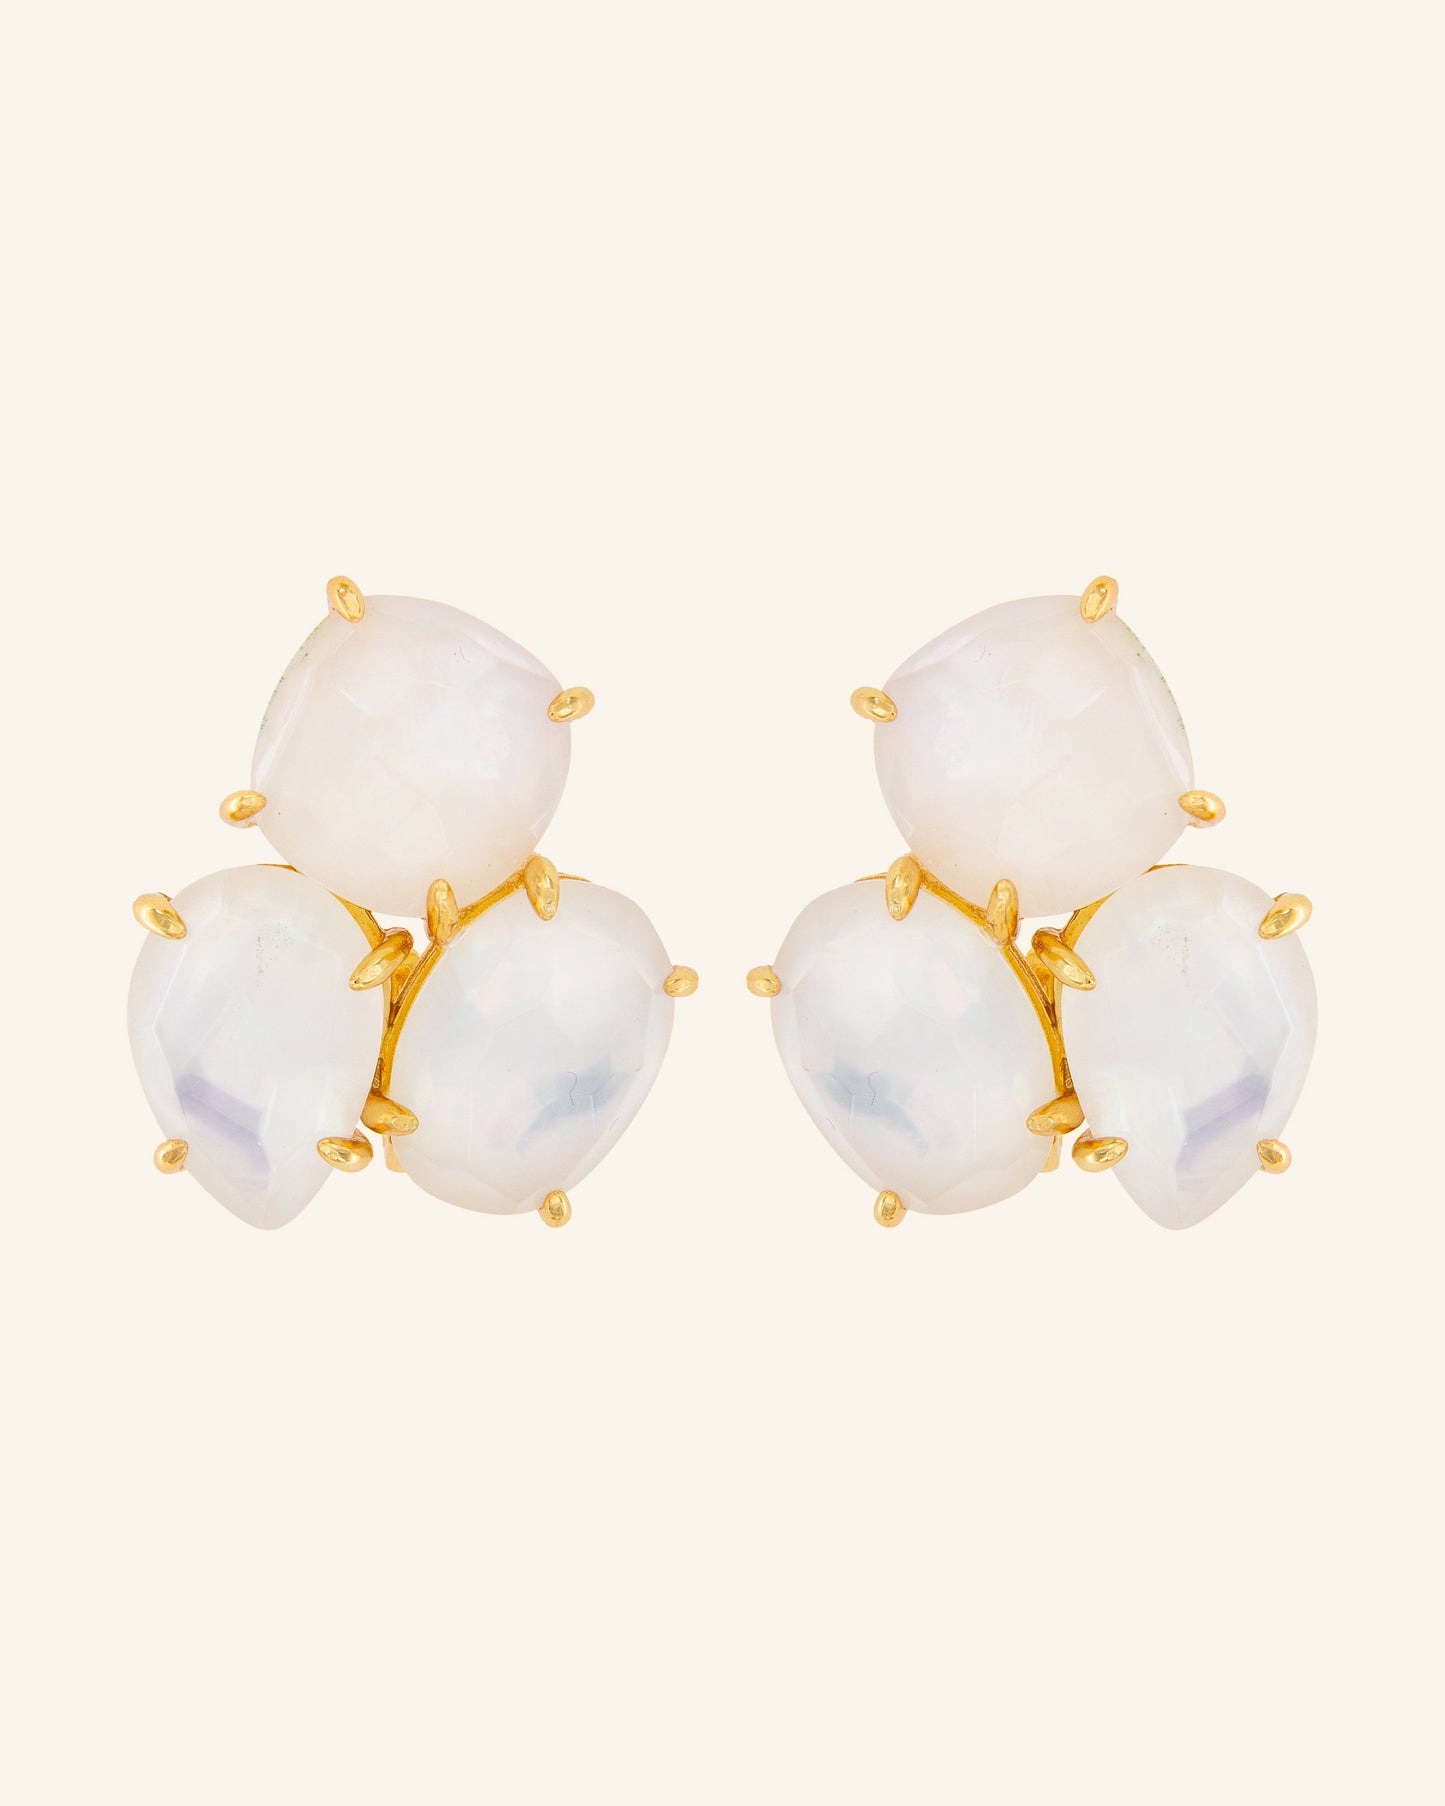 Kraz earrings with white mother-of-pearl and colorless quartz